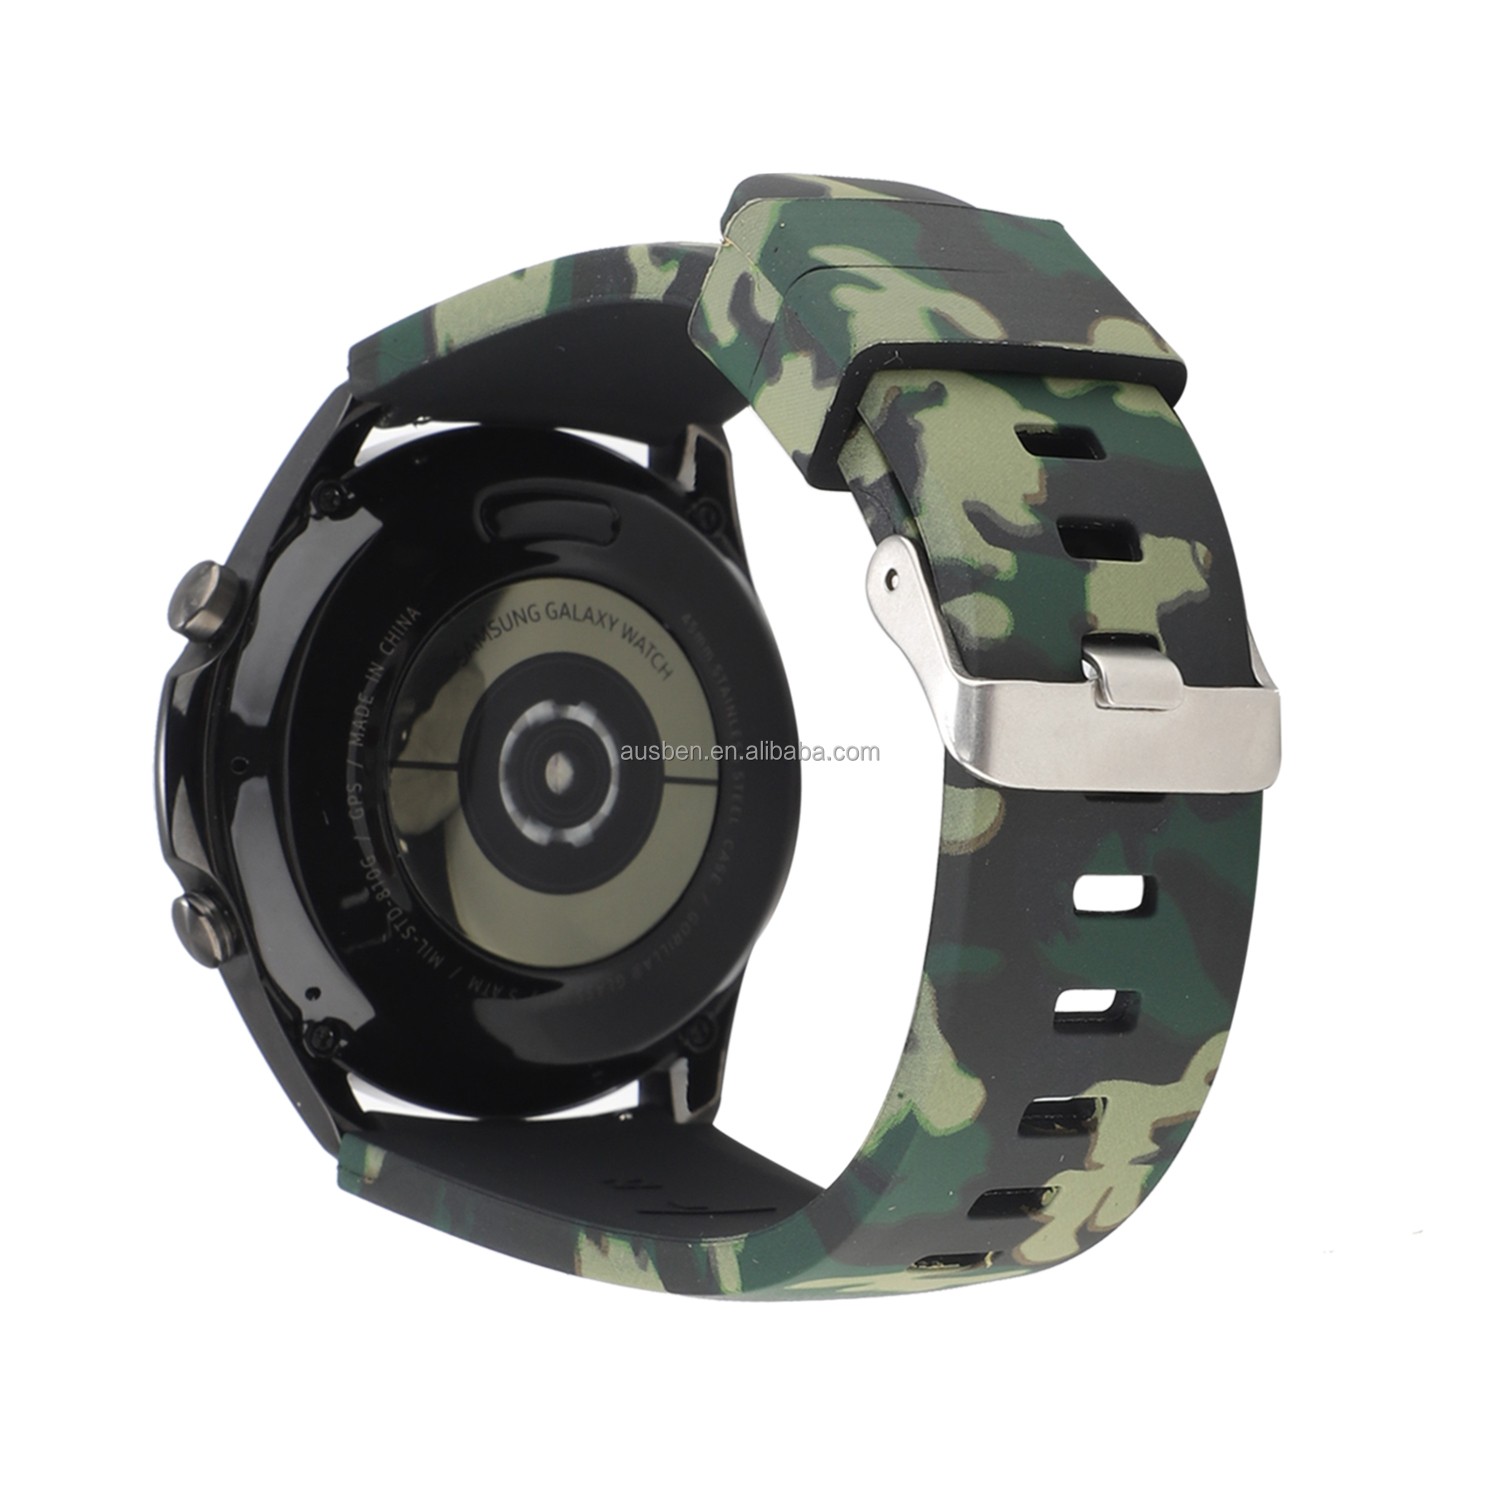 Camouflage Sport Rubber Band for Samsung Galaxy Watch 3 45mm Camo Silicone Strap Bracelet Wrist Belt